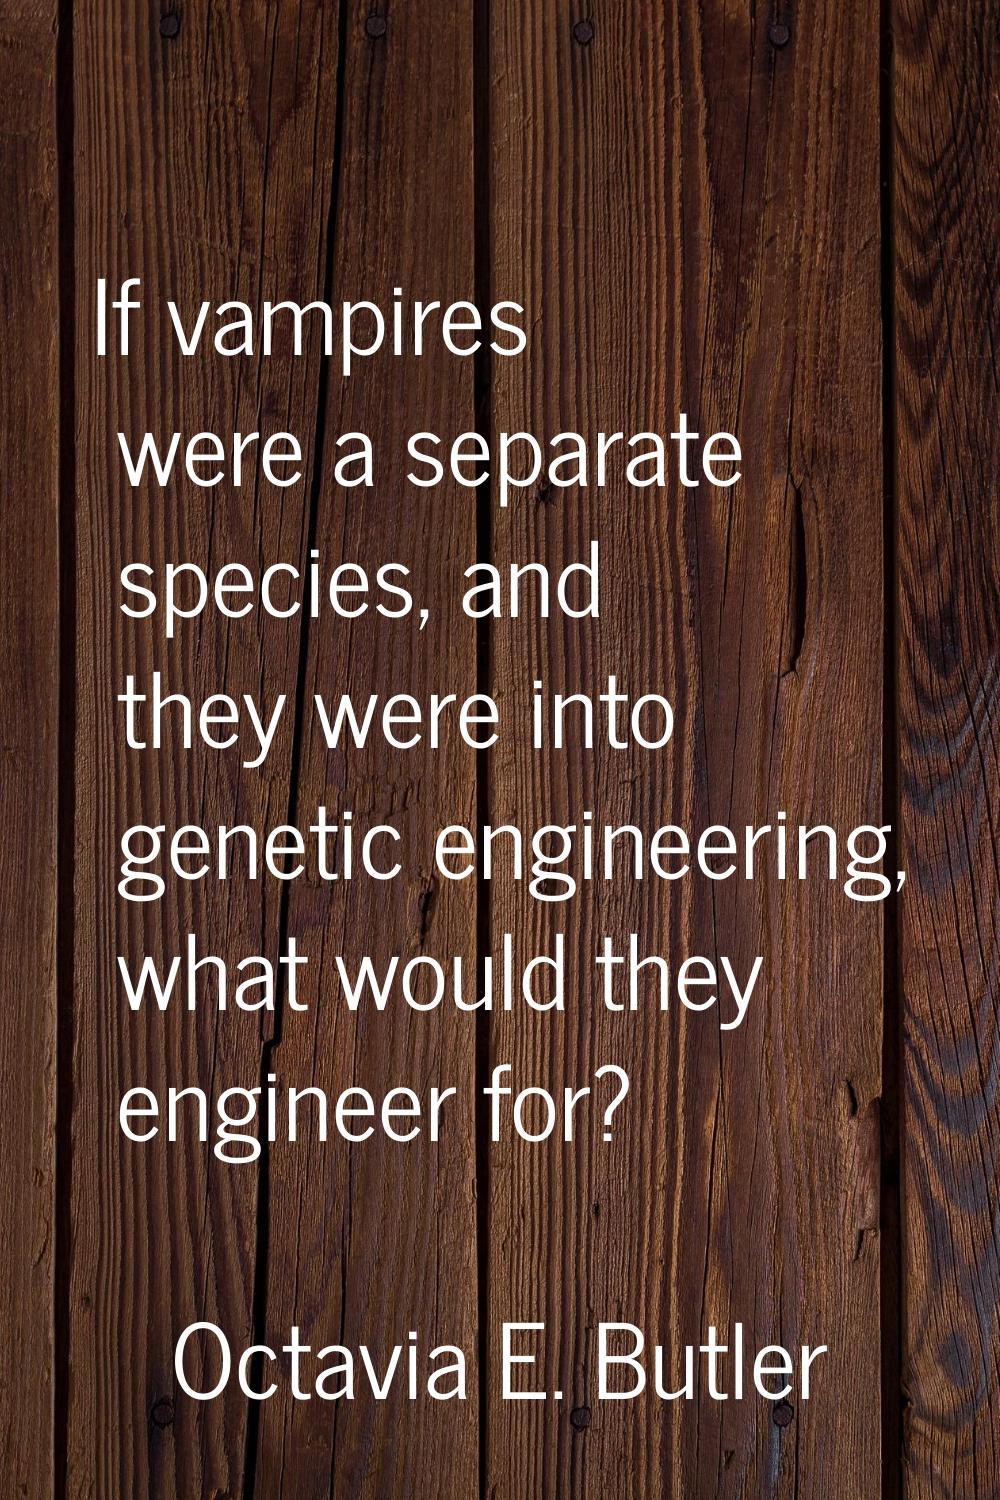 If vampires were a separate species, and they were into genetic engineering, what would they engine